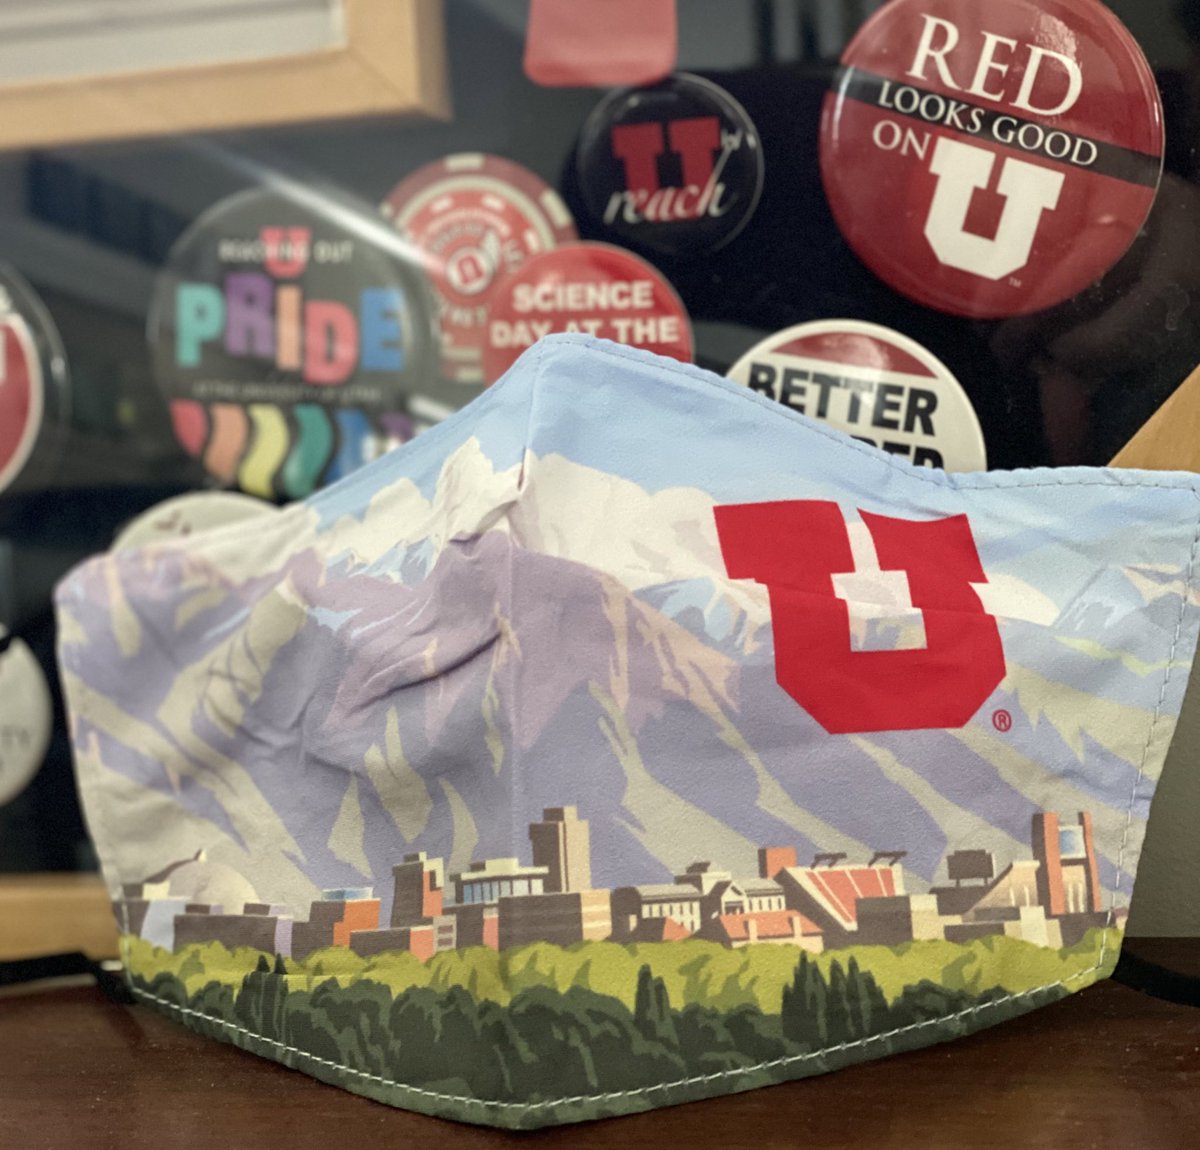 It’s back by popular demand! We gave away these U landscape masks in the spring, and they were such a hit we made some more. If you want an iconic #UofU campus scene for your face mask repertoire (perhaps for fall break travels) retweet this and we’ll send one out.